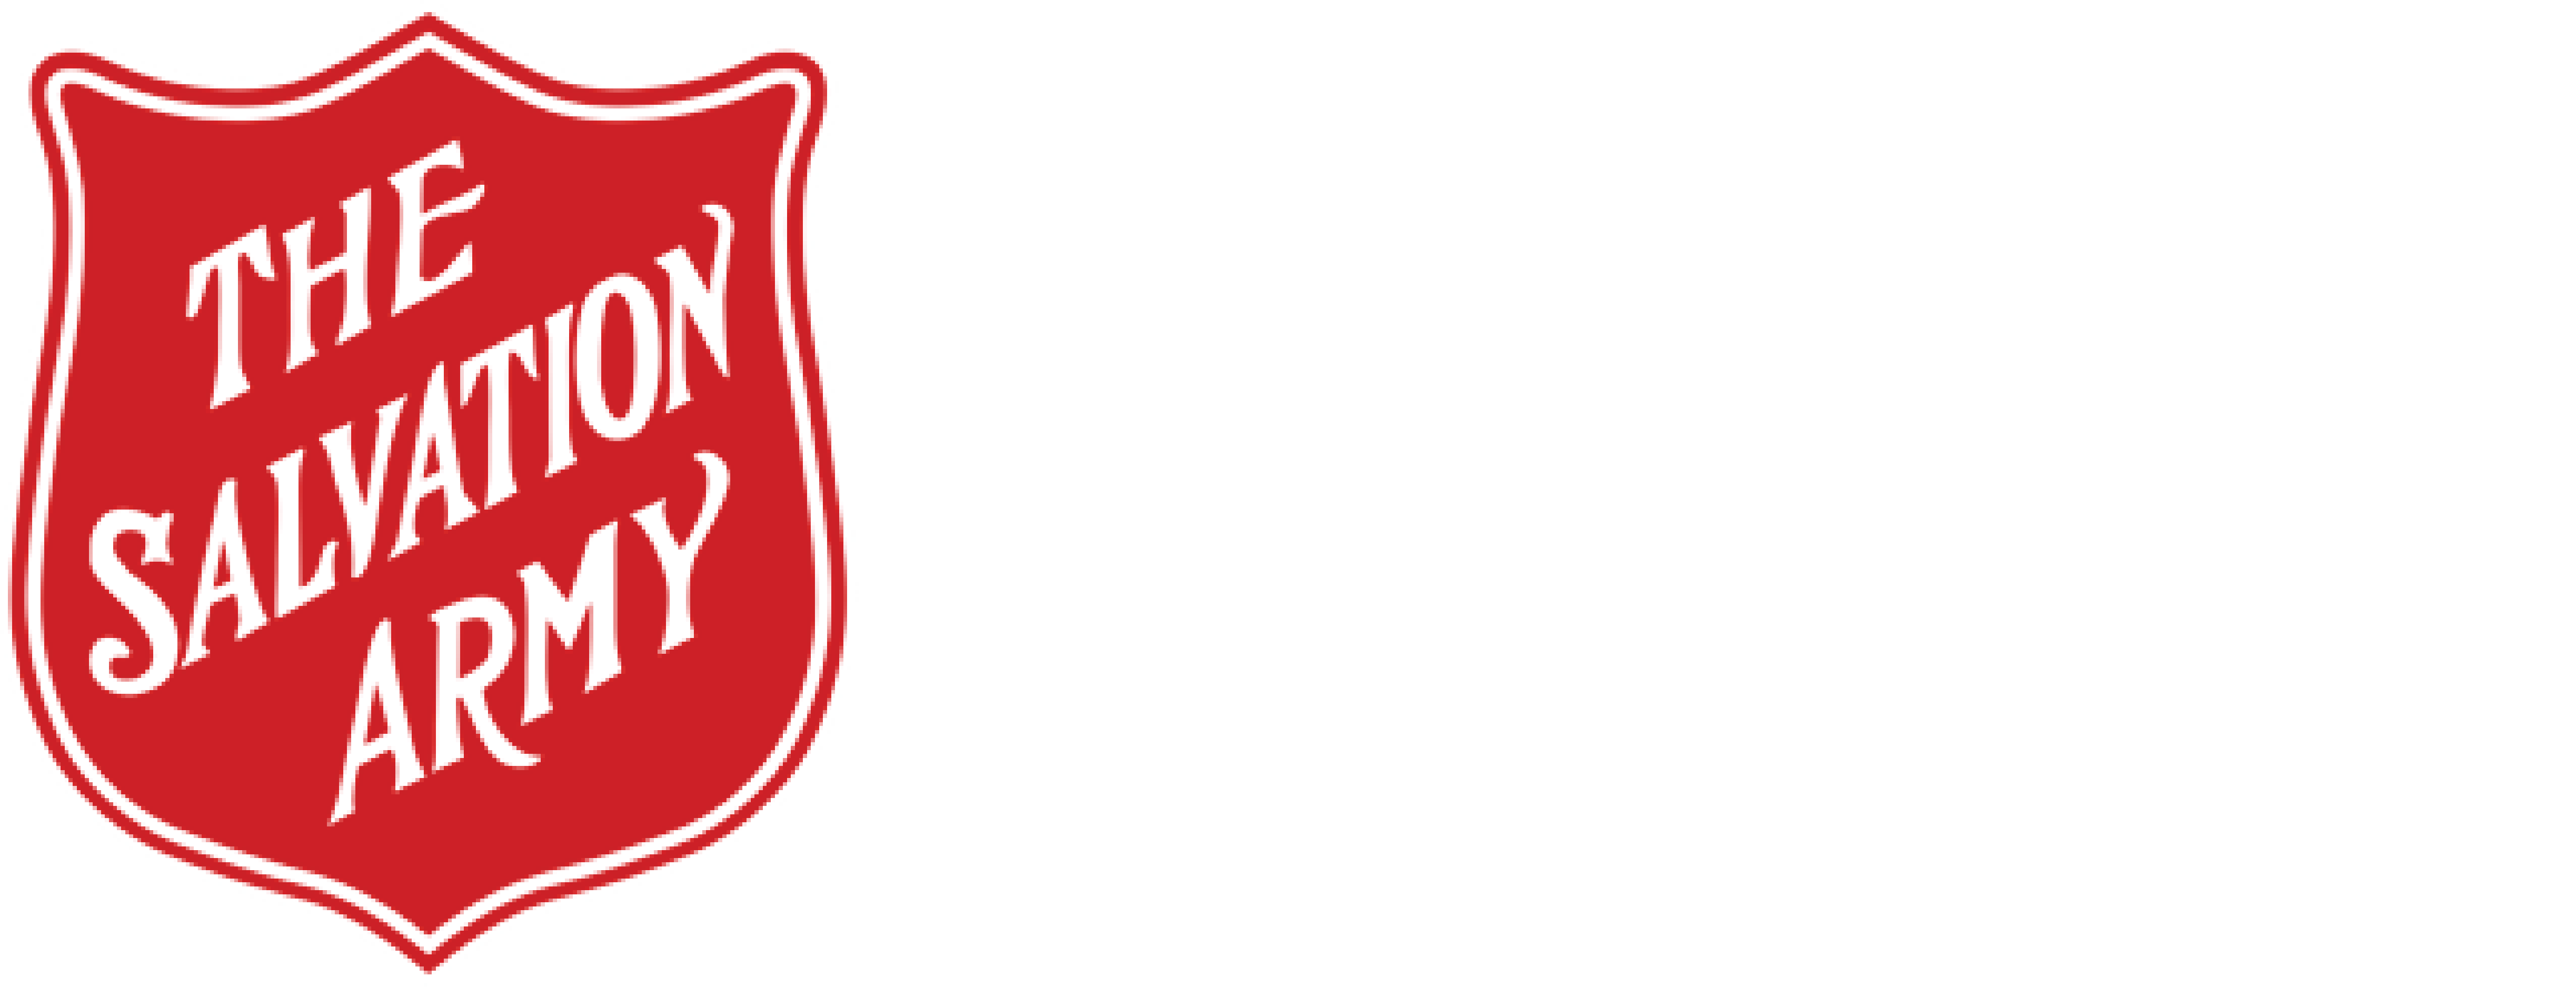 Logo of The Salvation Army, with a red shield and white lettering, next to the word 'Blog' in large white font